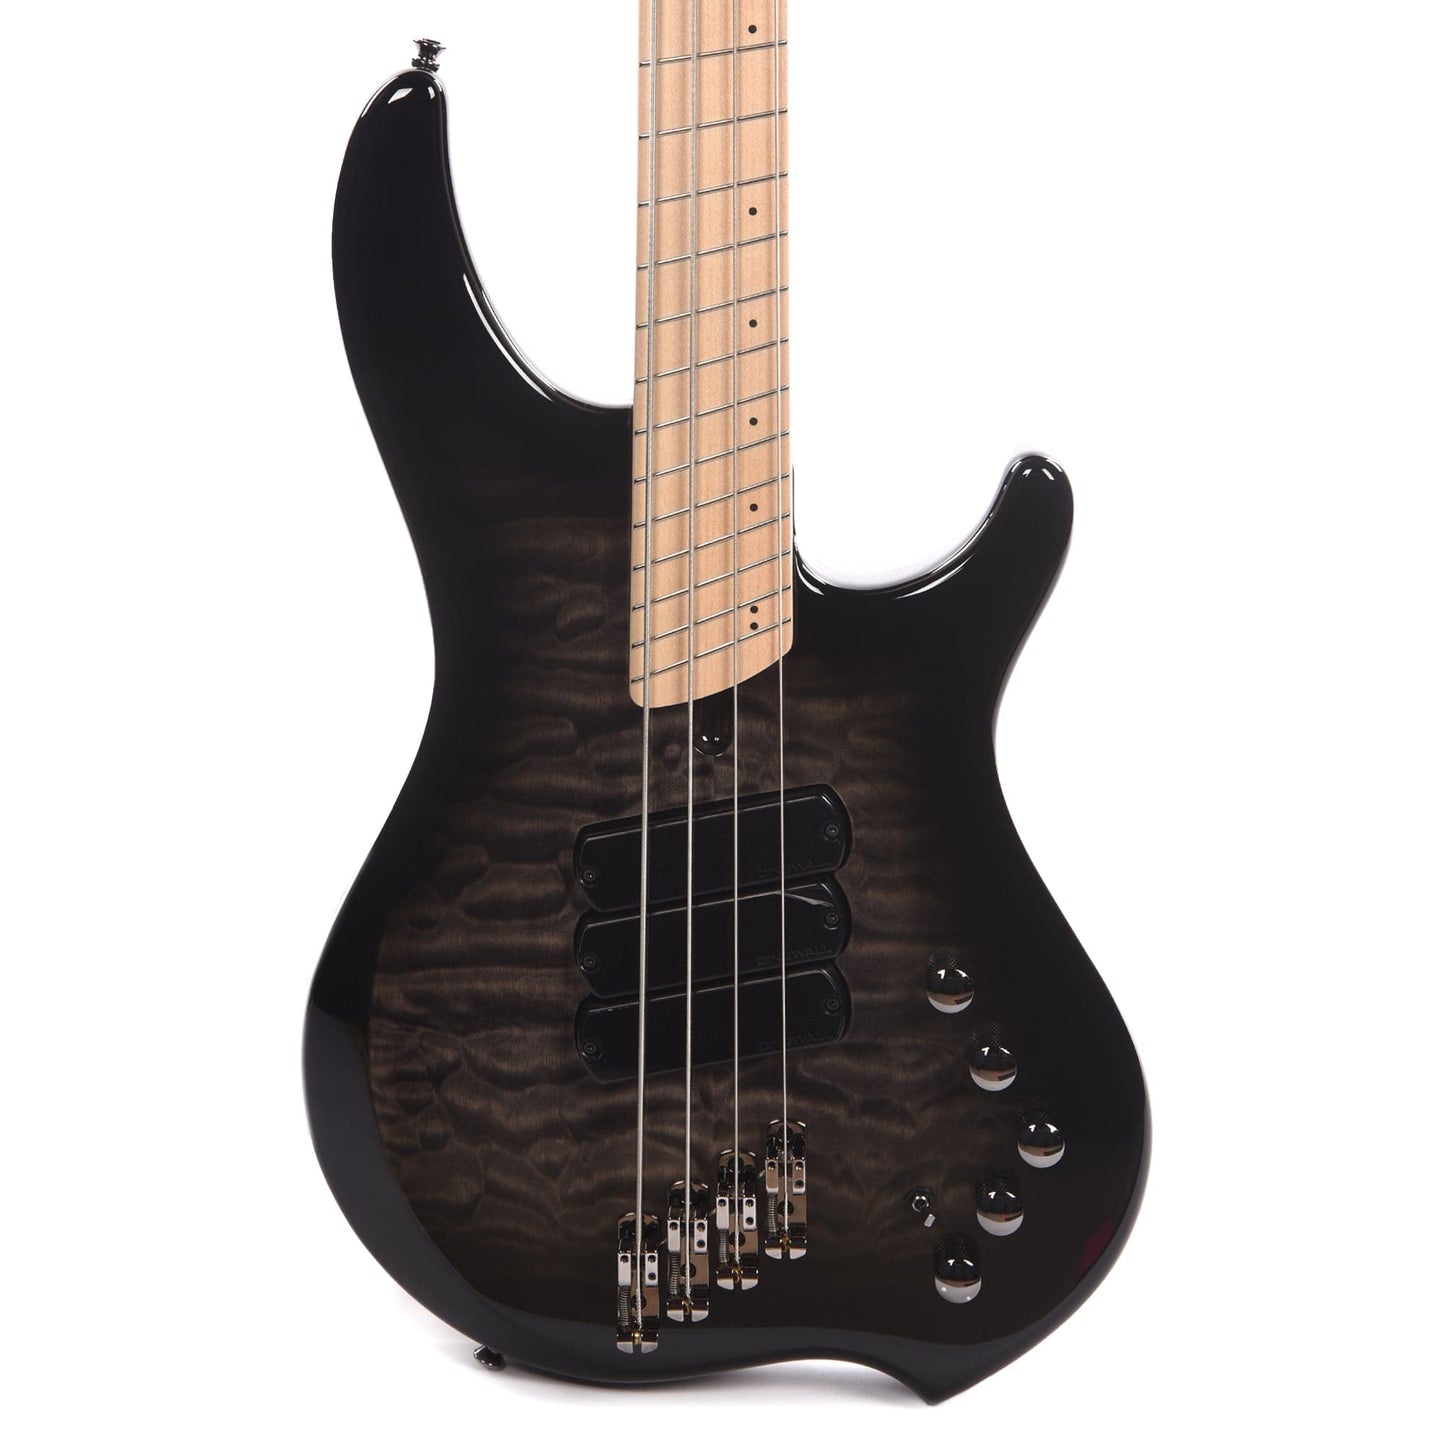 Dingwall Combustion Swamp Ash/Quilted Maple 2-Tone Blackburst Bass Guitars / 5-String or More